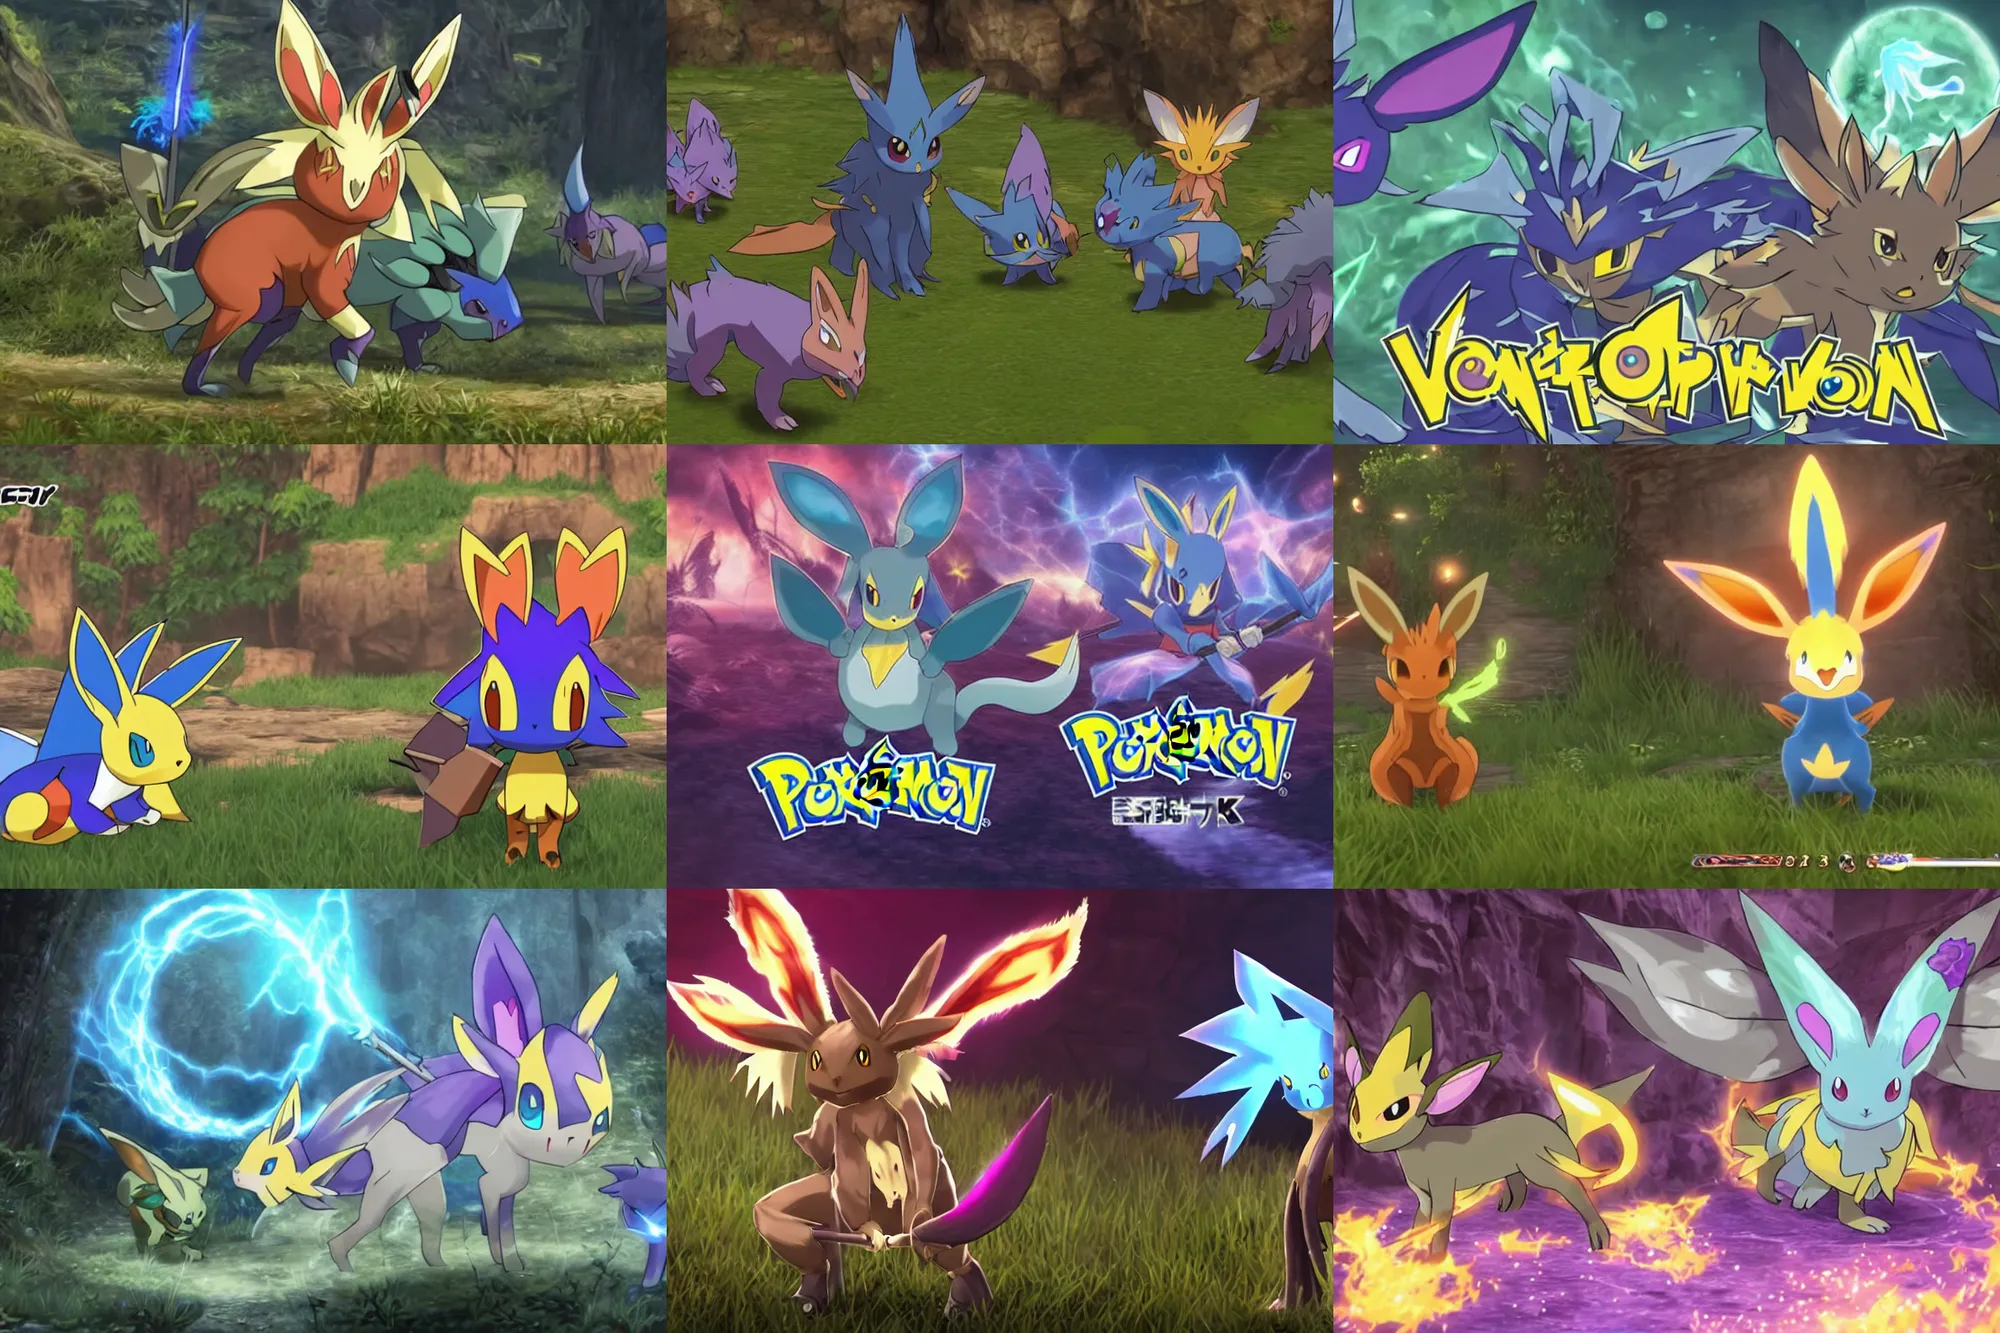 Prompt: video game elden pokemon : espeons reprisal star valley resident evil vaporeons mystery dungeon 4 k fps tpc resident eevee holding spear fighting espeon, the old god wearing a witch hat pokemon final gamecube